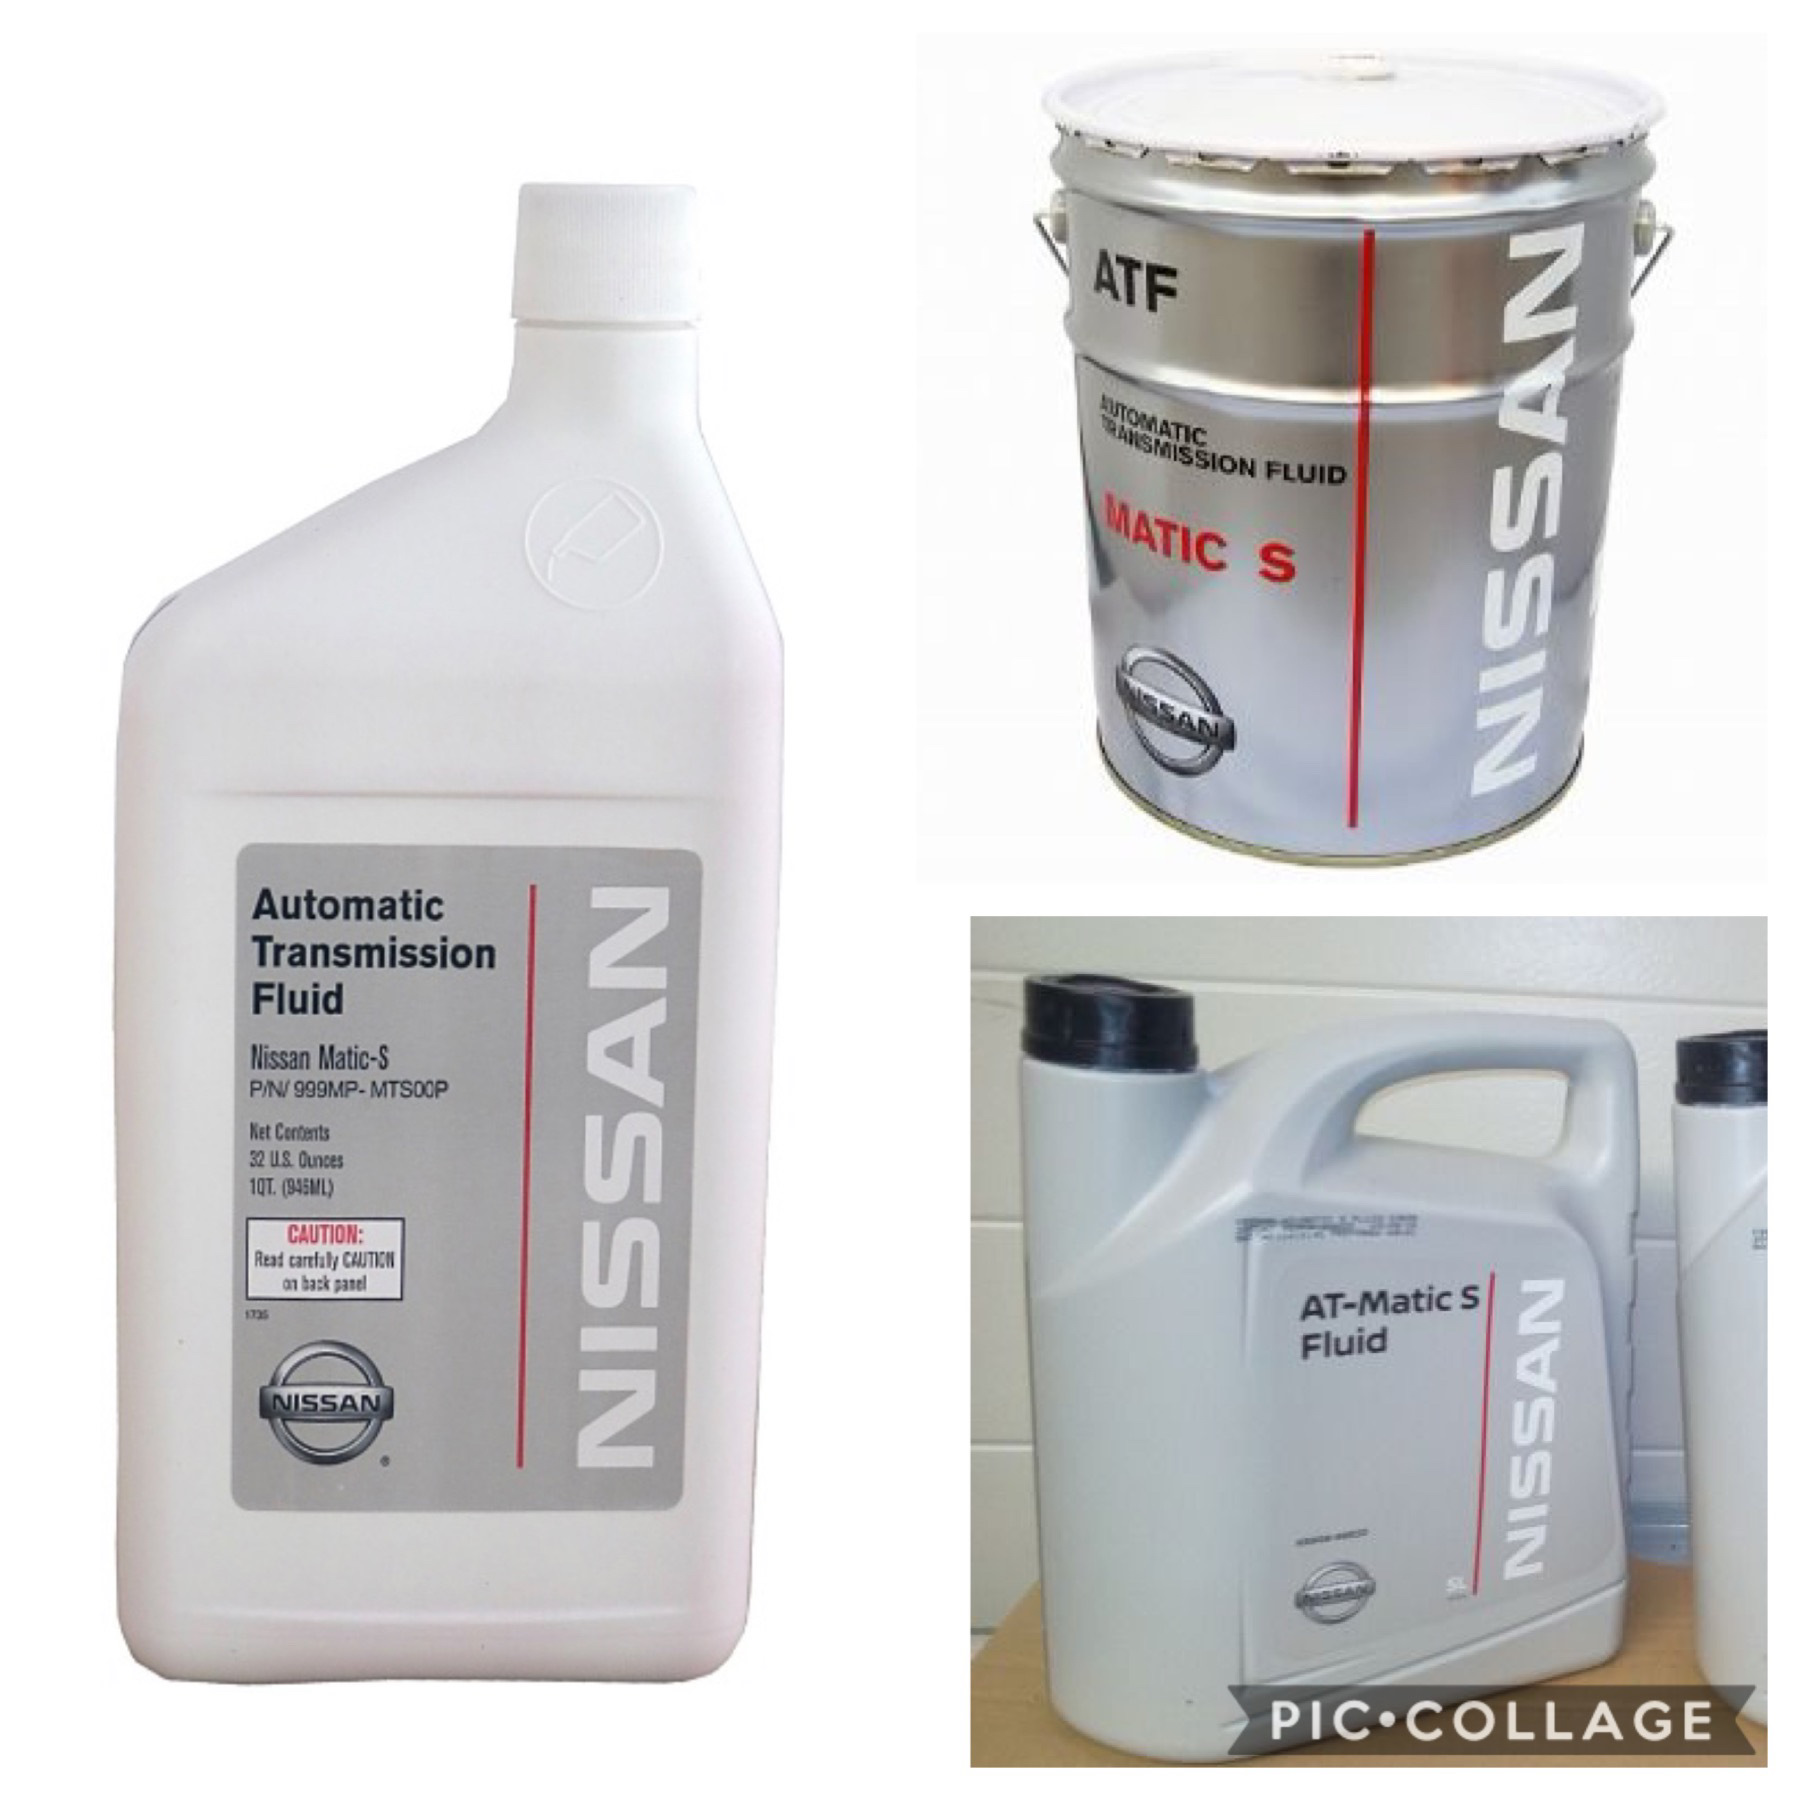 Atf 1 литр. Масло Nissan ATF matic-s. Nissan Automatic transmission Fluid matic-s. Nissan matic s ATF 1 литр. Nissan matic s 20 литров.